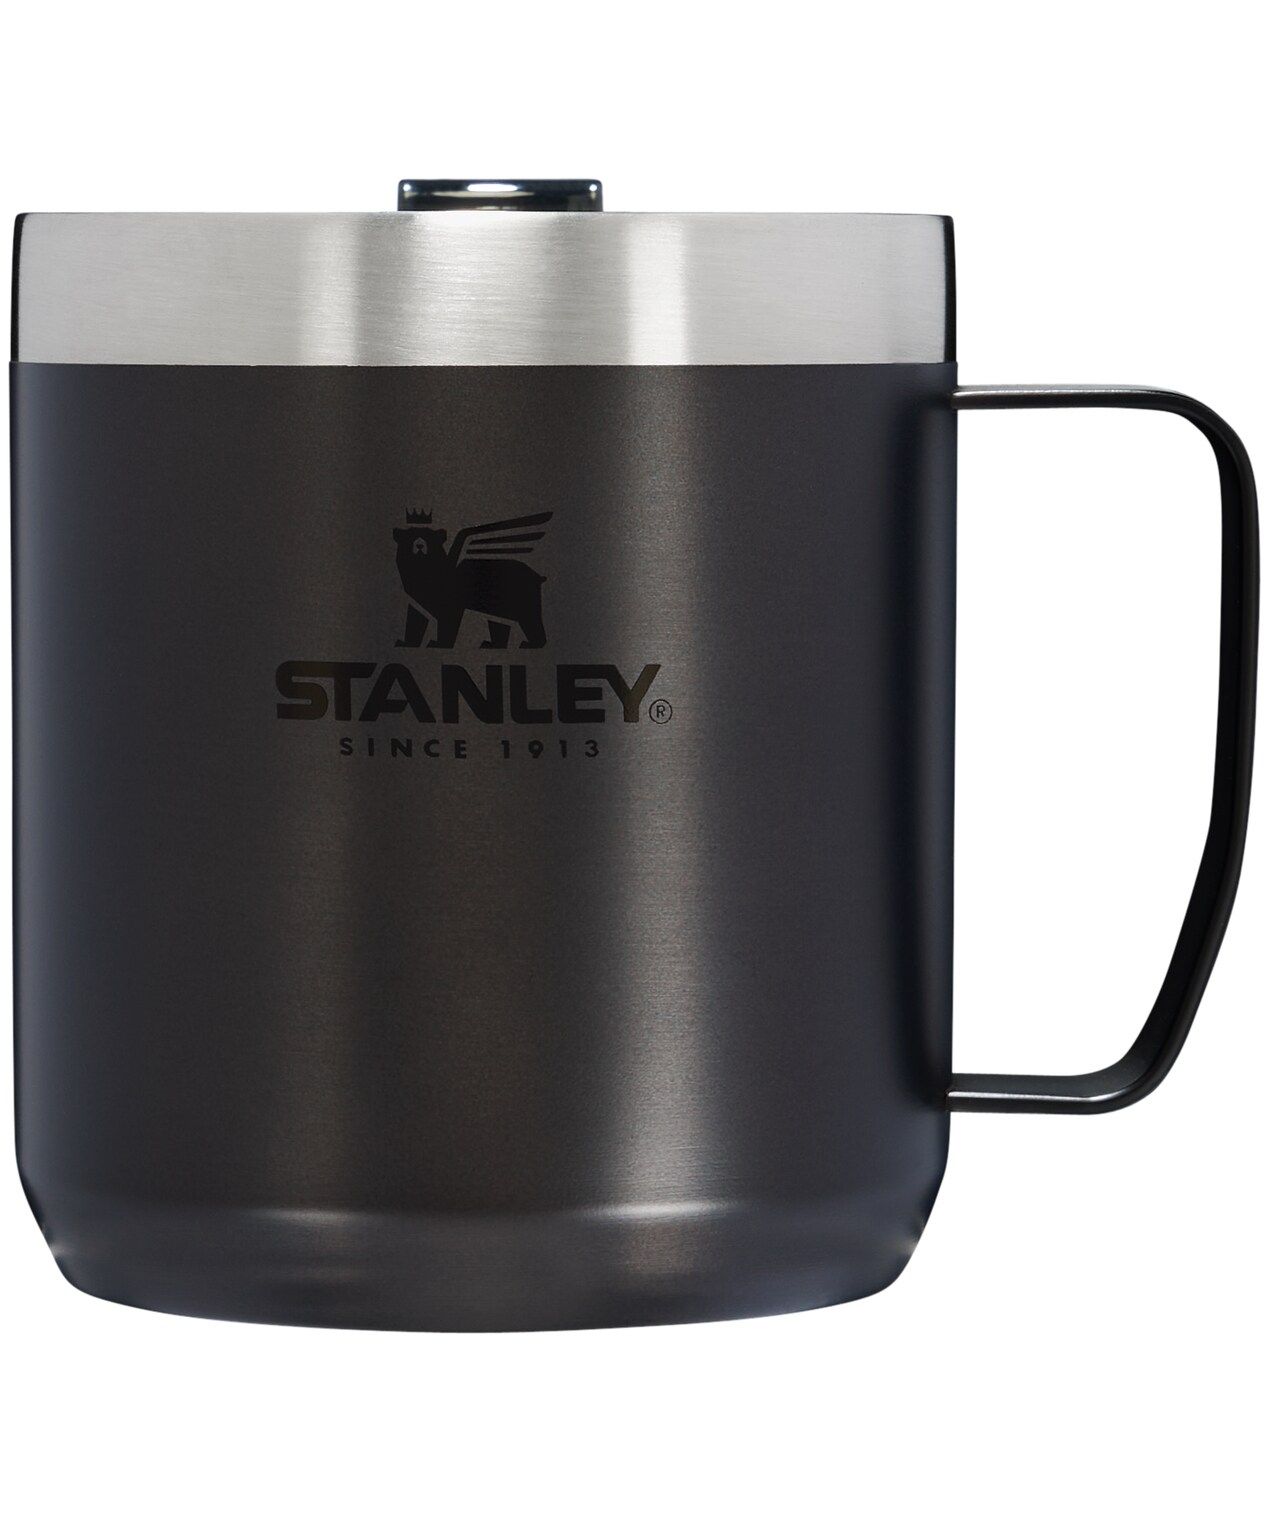 Stanley 12-fl oz Stainless Steel Insulated Travel Mug | Lowe's